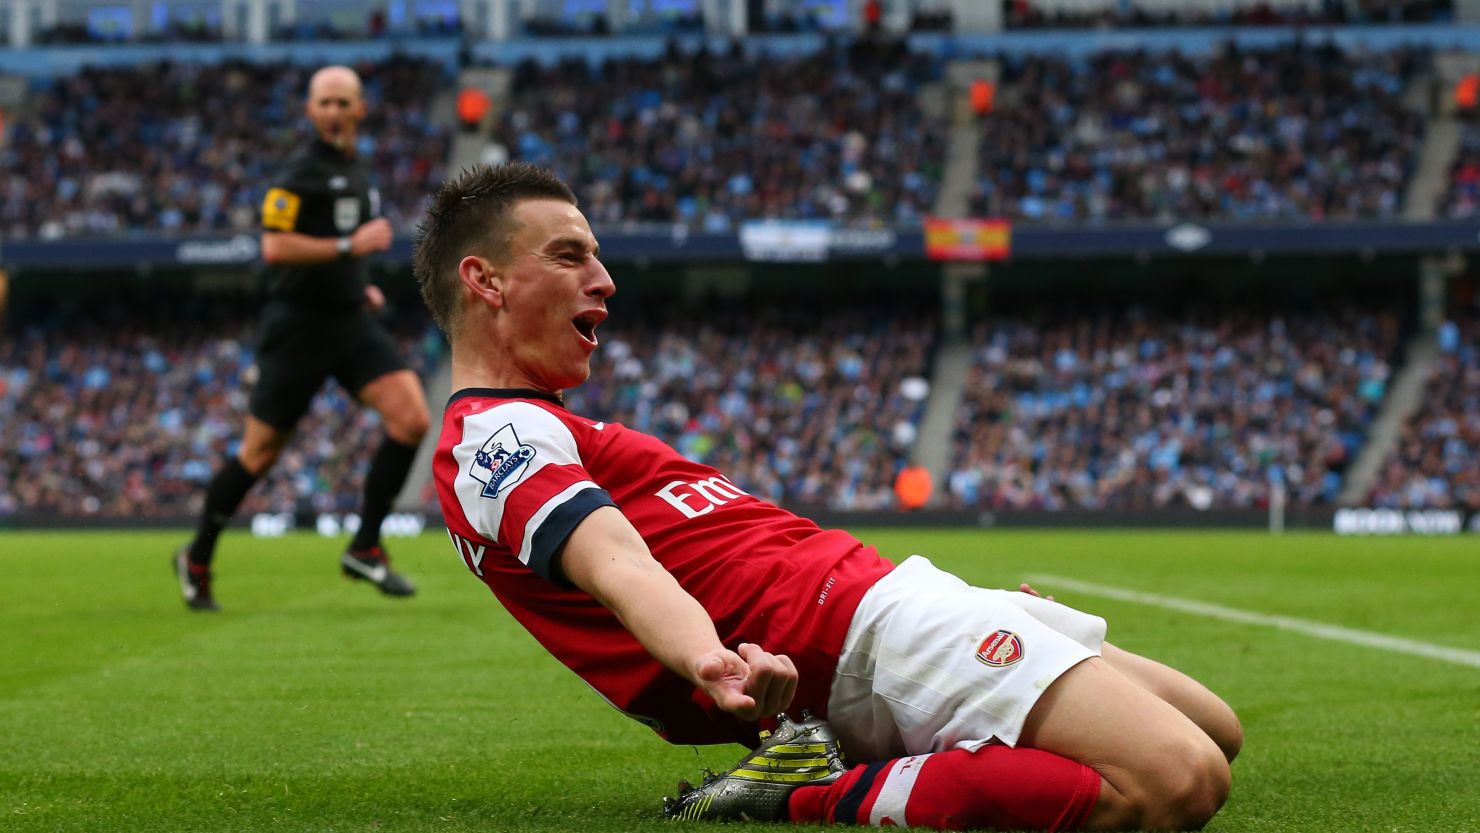 Arsenal's Laurent Koscielny grabbed an 82nd minute equalizer as Arsenal continued their unbeaten start to the season.